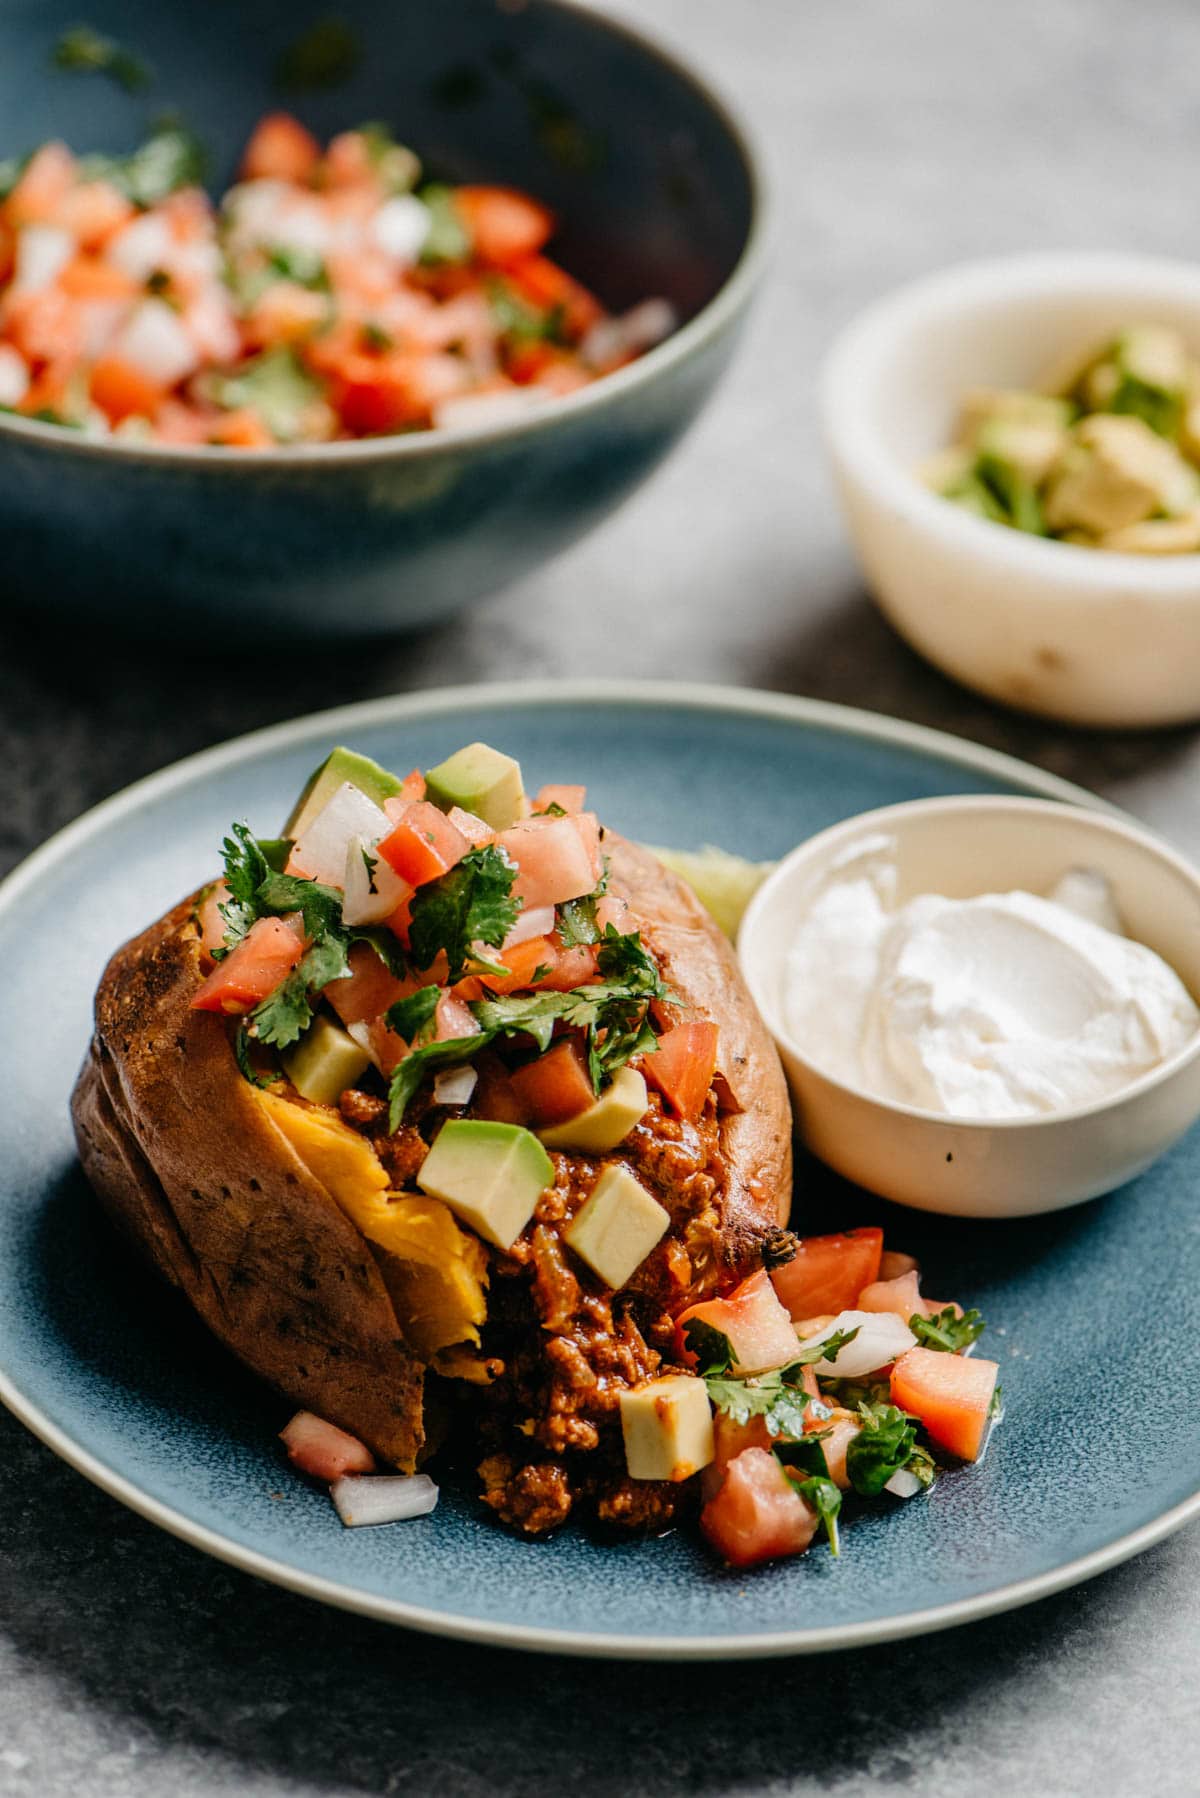 Side view, a taco stuffed sweet potato on a blue plate, garnished with pico de gallo and avocado; small bowls of various toppings are in the background.